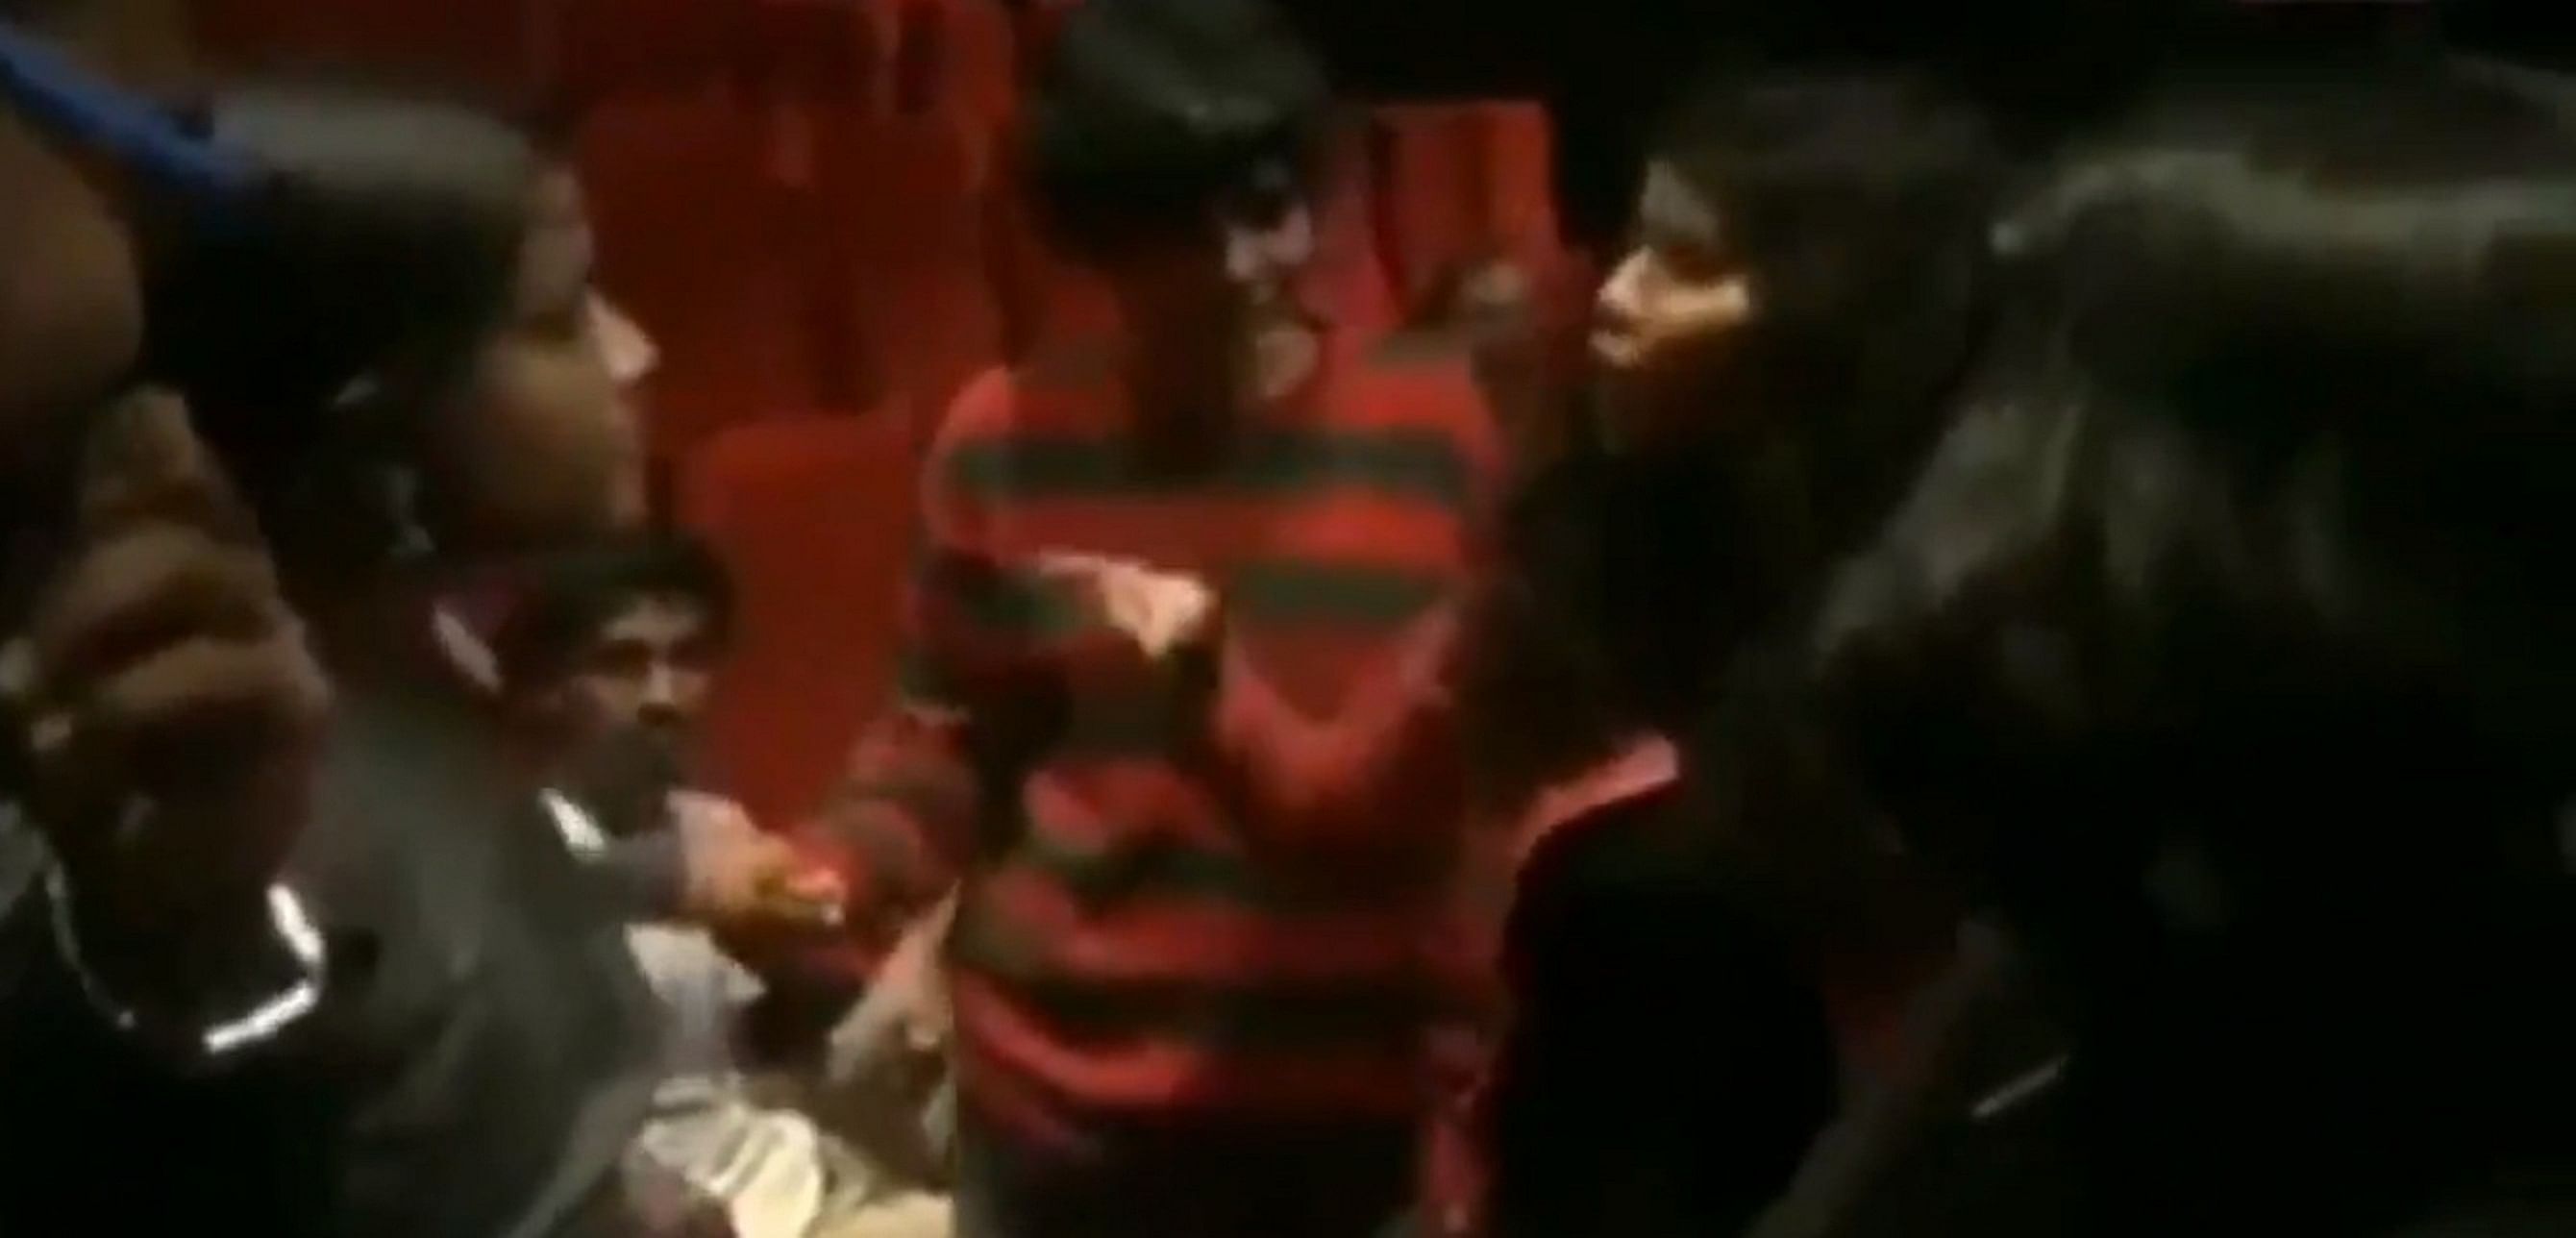 A screengrab from the video that shows a crowd of people heckling a group at a theatre for not standing for the National Anthem.